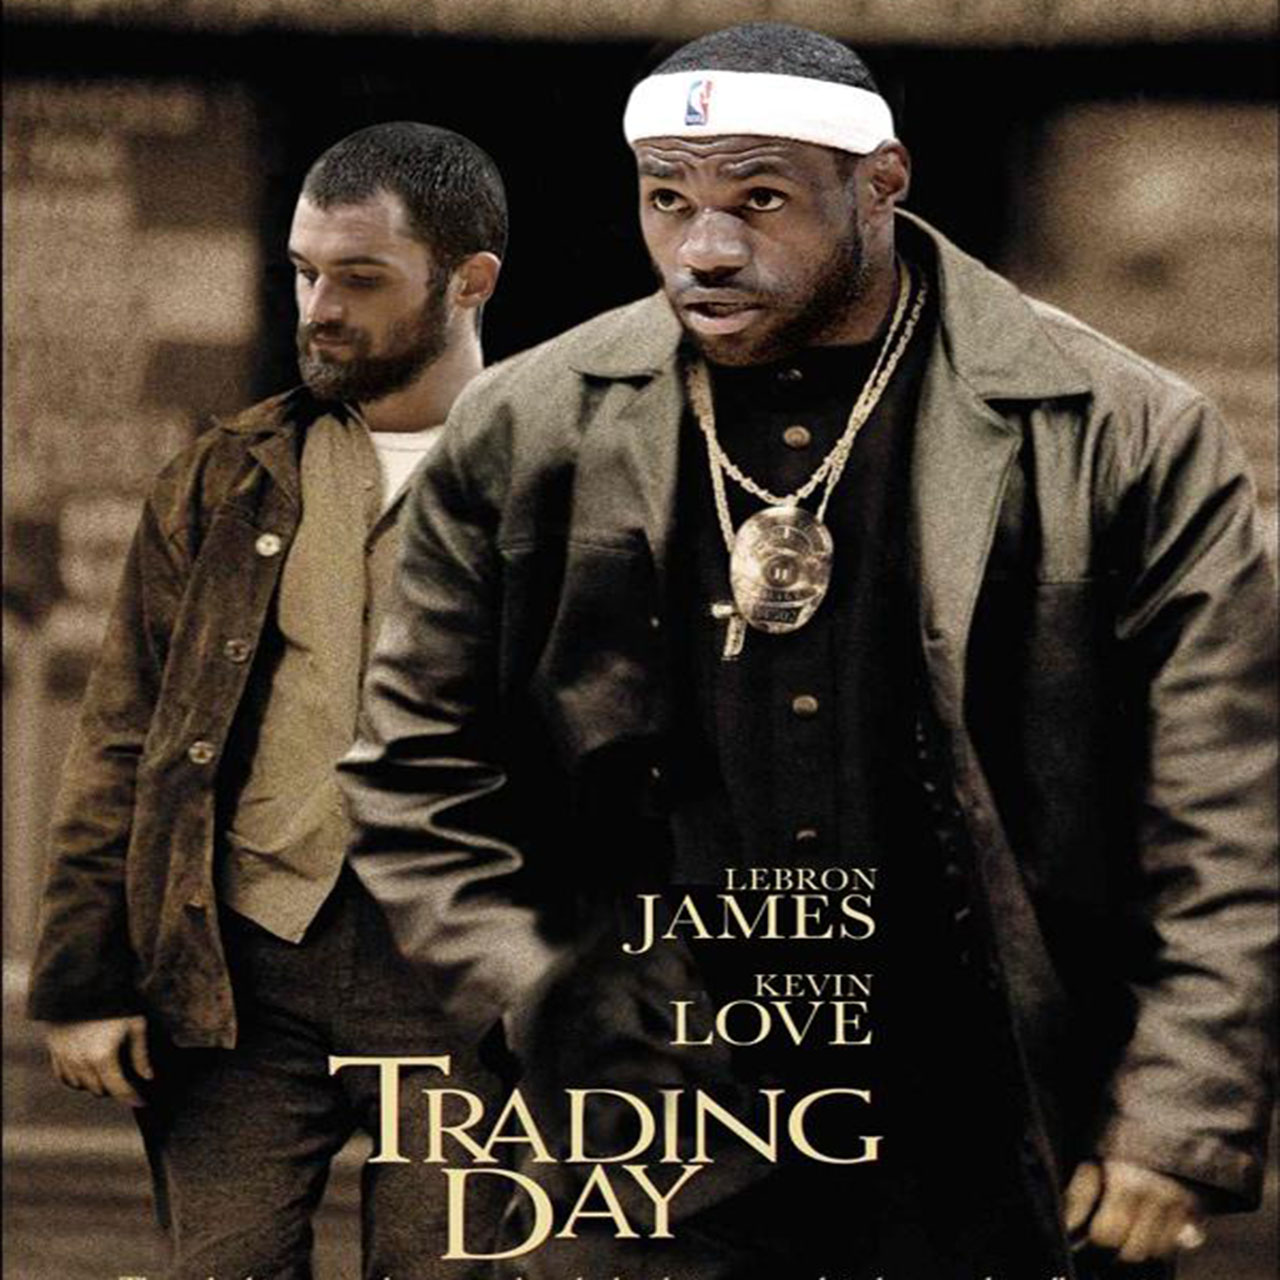 LeBron James and Kevin Love in "Trading Day"